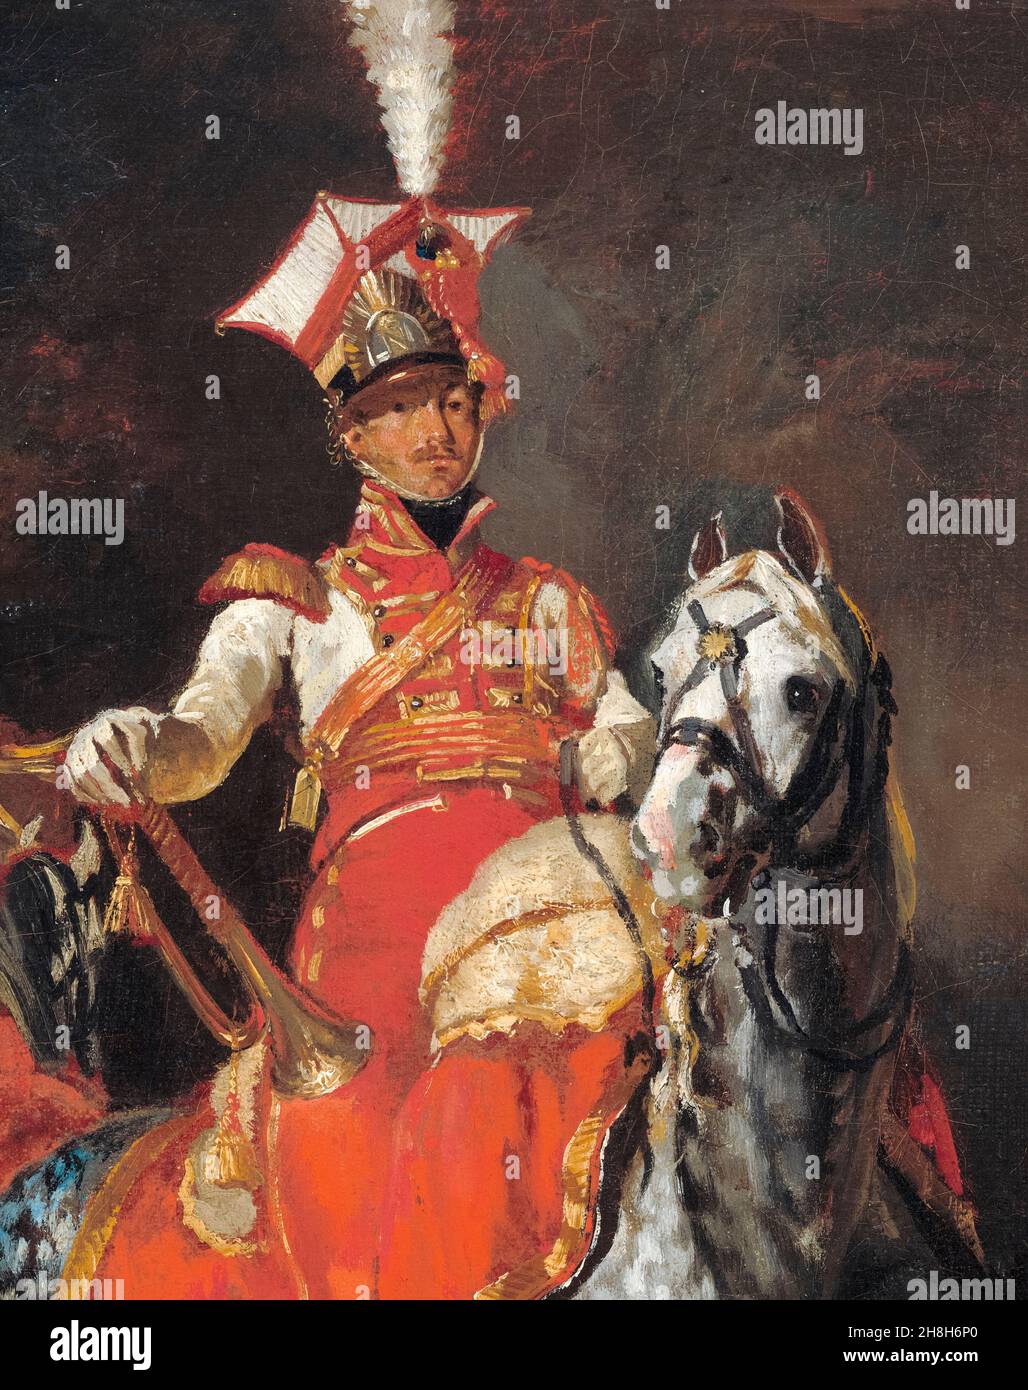 Mounted Trumpeter, of, Napoleon's Imperial Guard, painting detail by Théodore Géricault, 1813-1814 Stock Photo